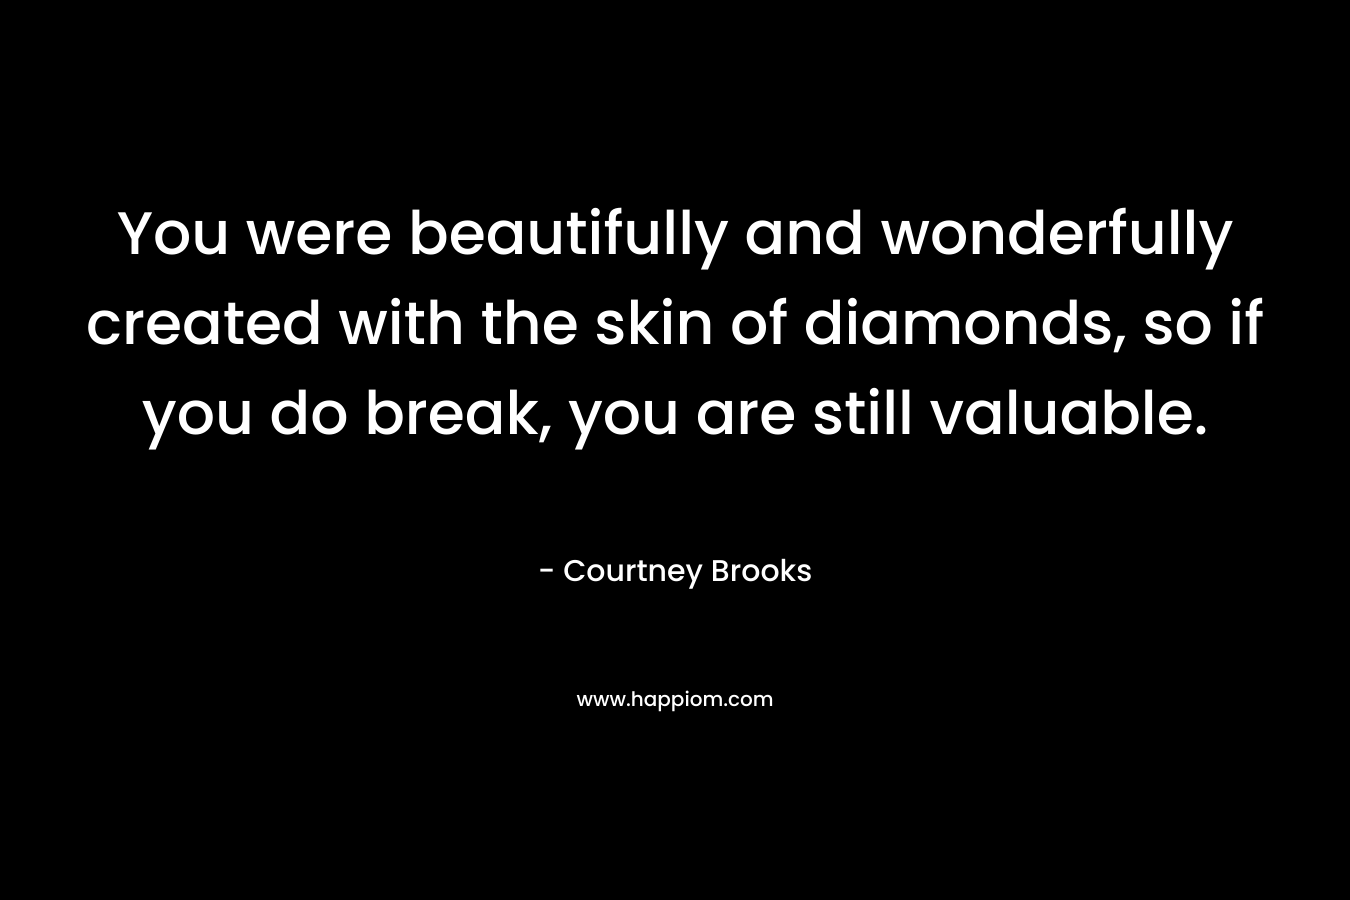 You were beautifully and wonderfully created with the skin of diamonds, so if you do break, you are still valuable. – Courtney Brooks